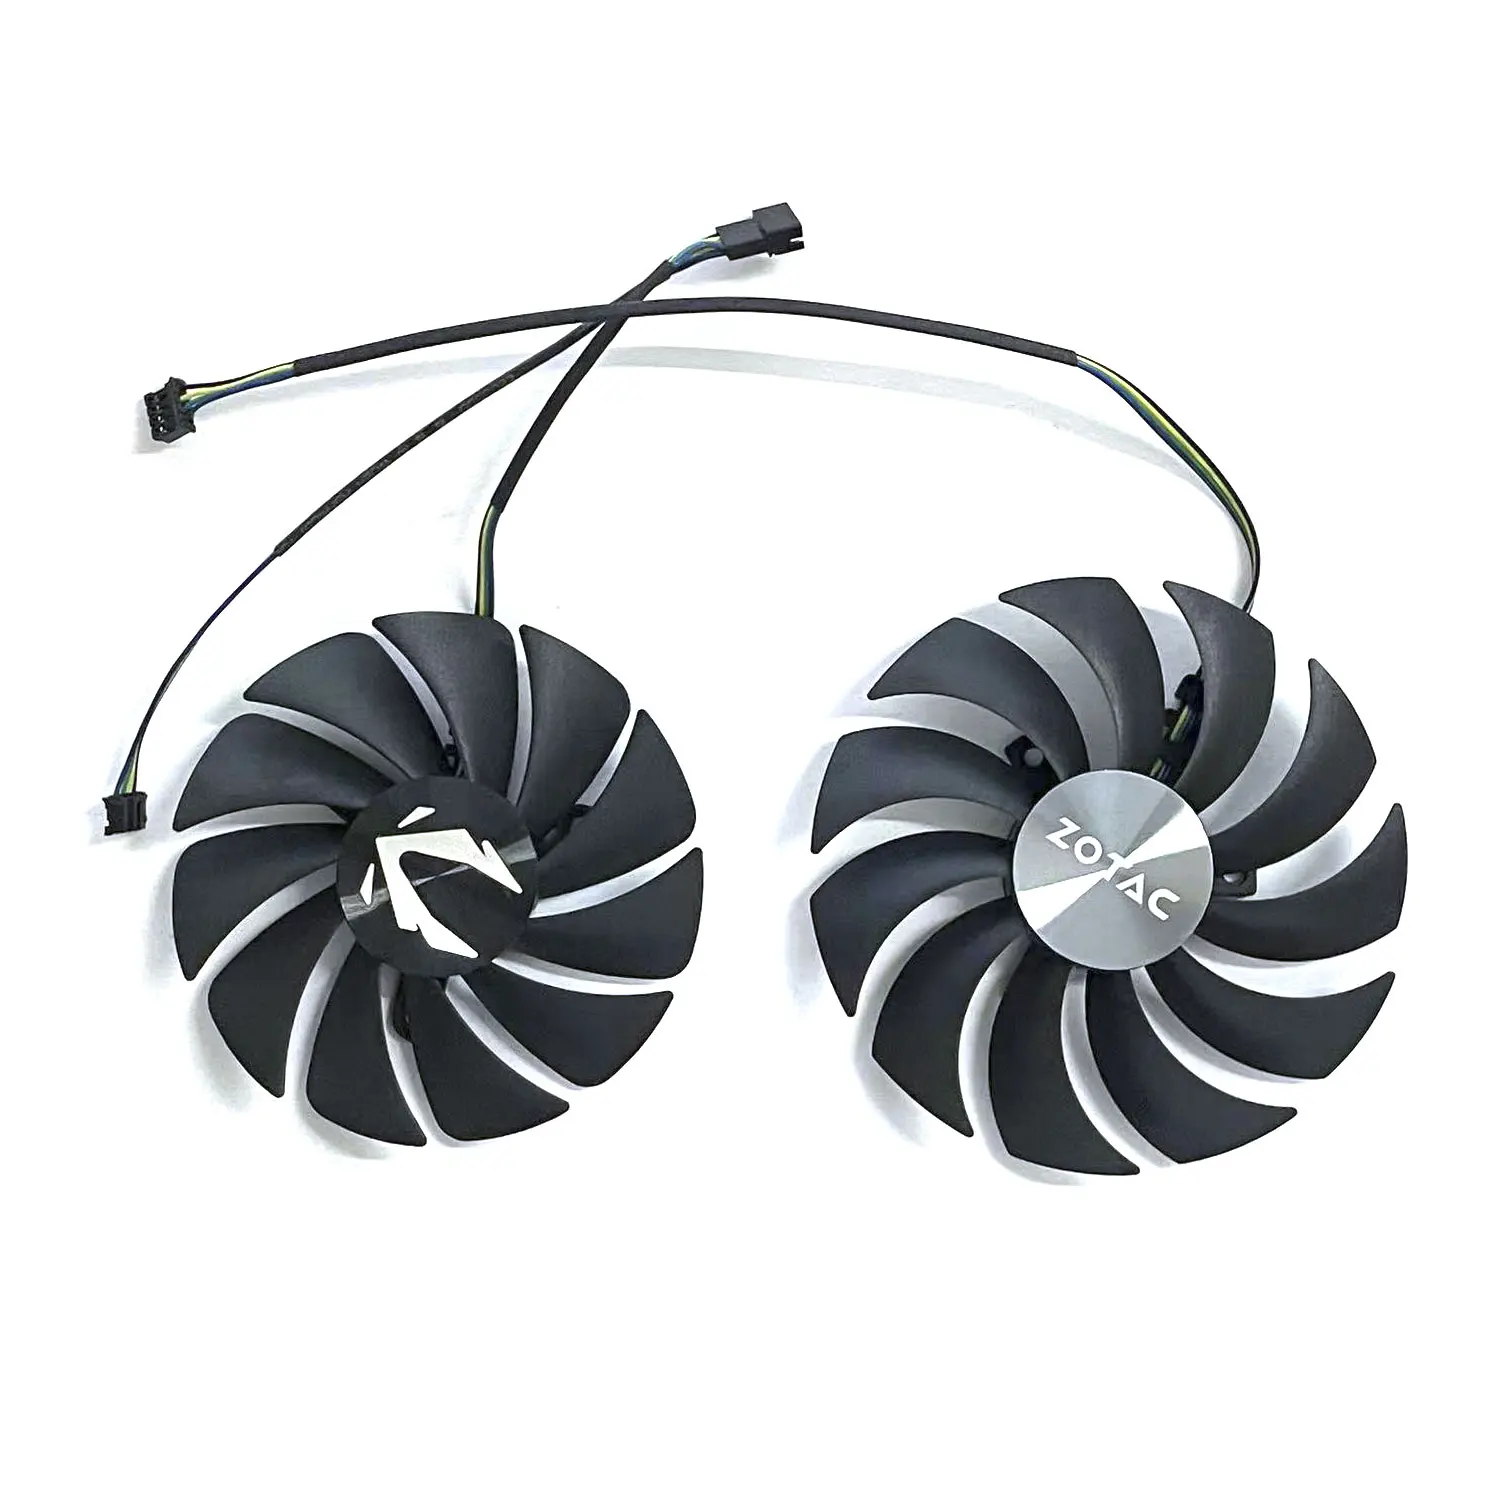 New 89MM 100MM GAA8S2U GA92S2U CF1010U12S CF9015H12S GPU Fan 4PIN for ZOTAC RTX 3070 3070TI Twin Edge Graphics Card Cooling Fan